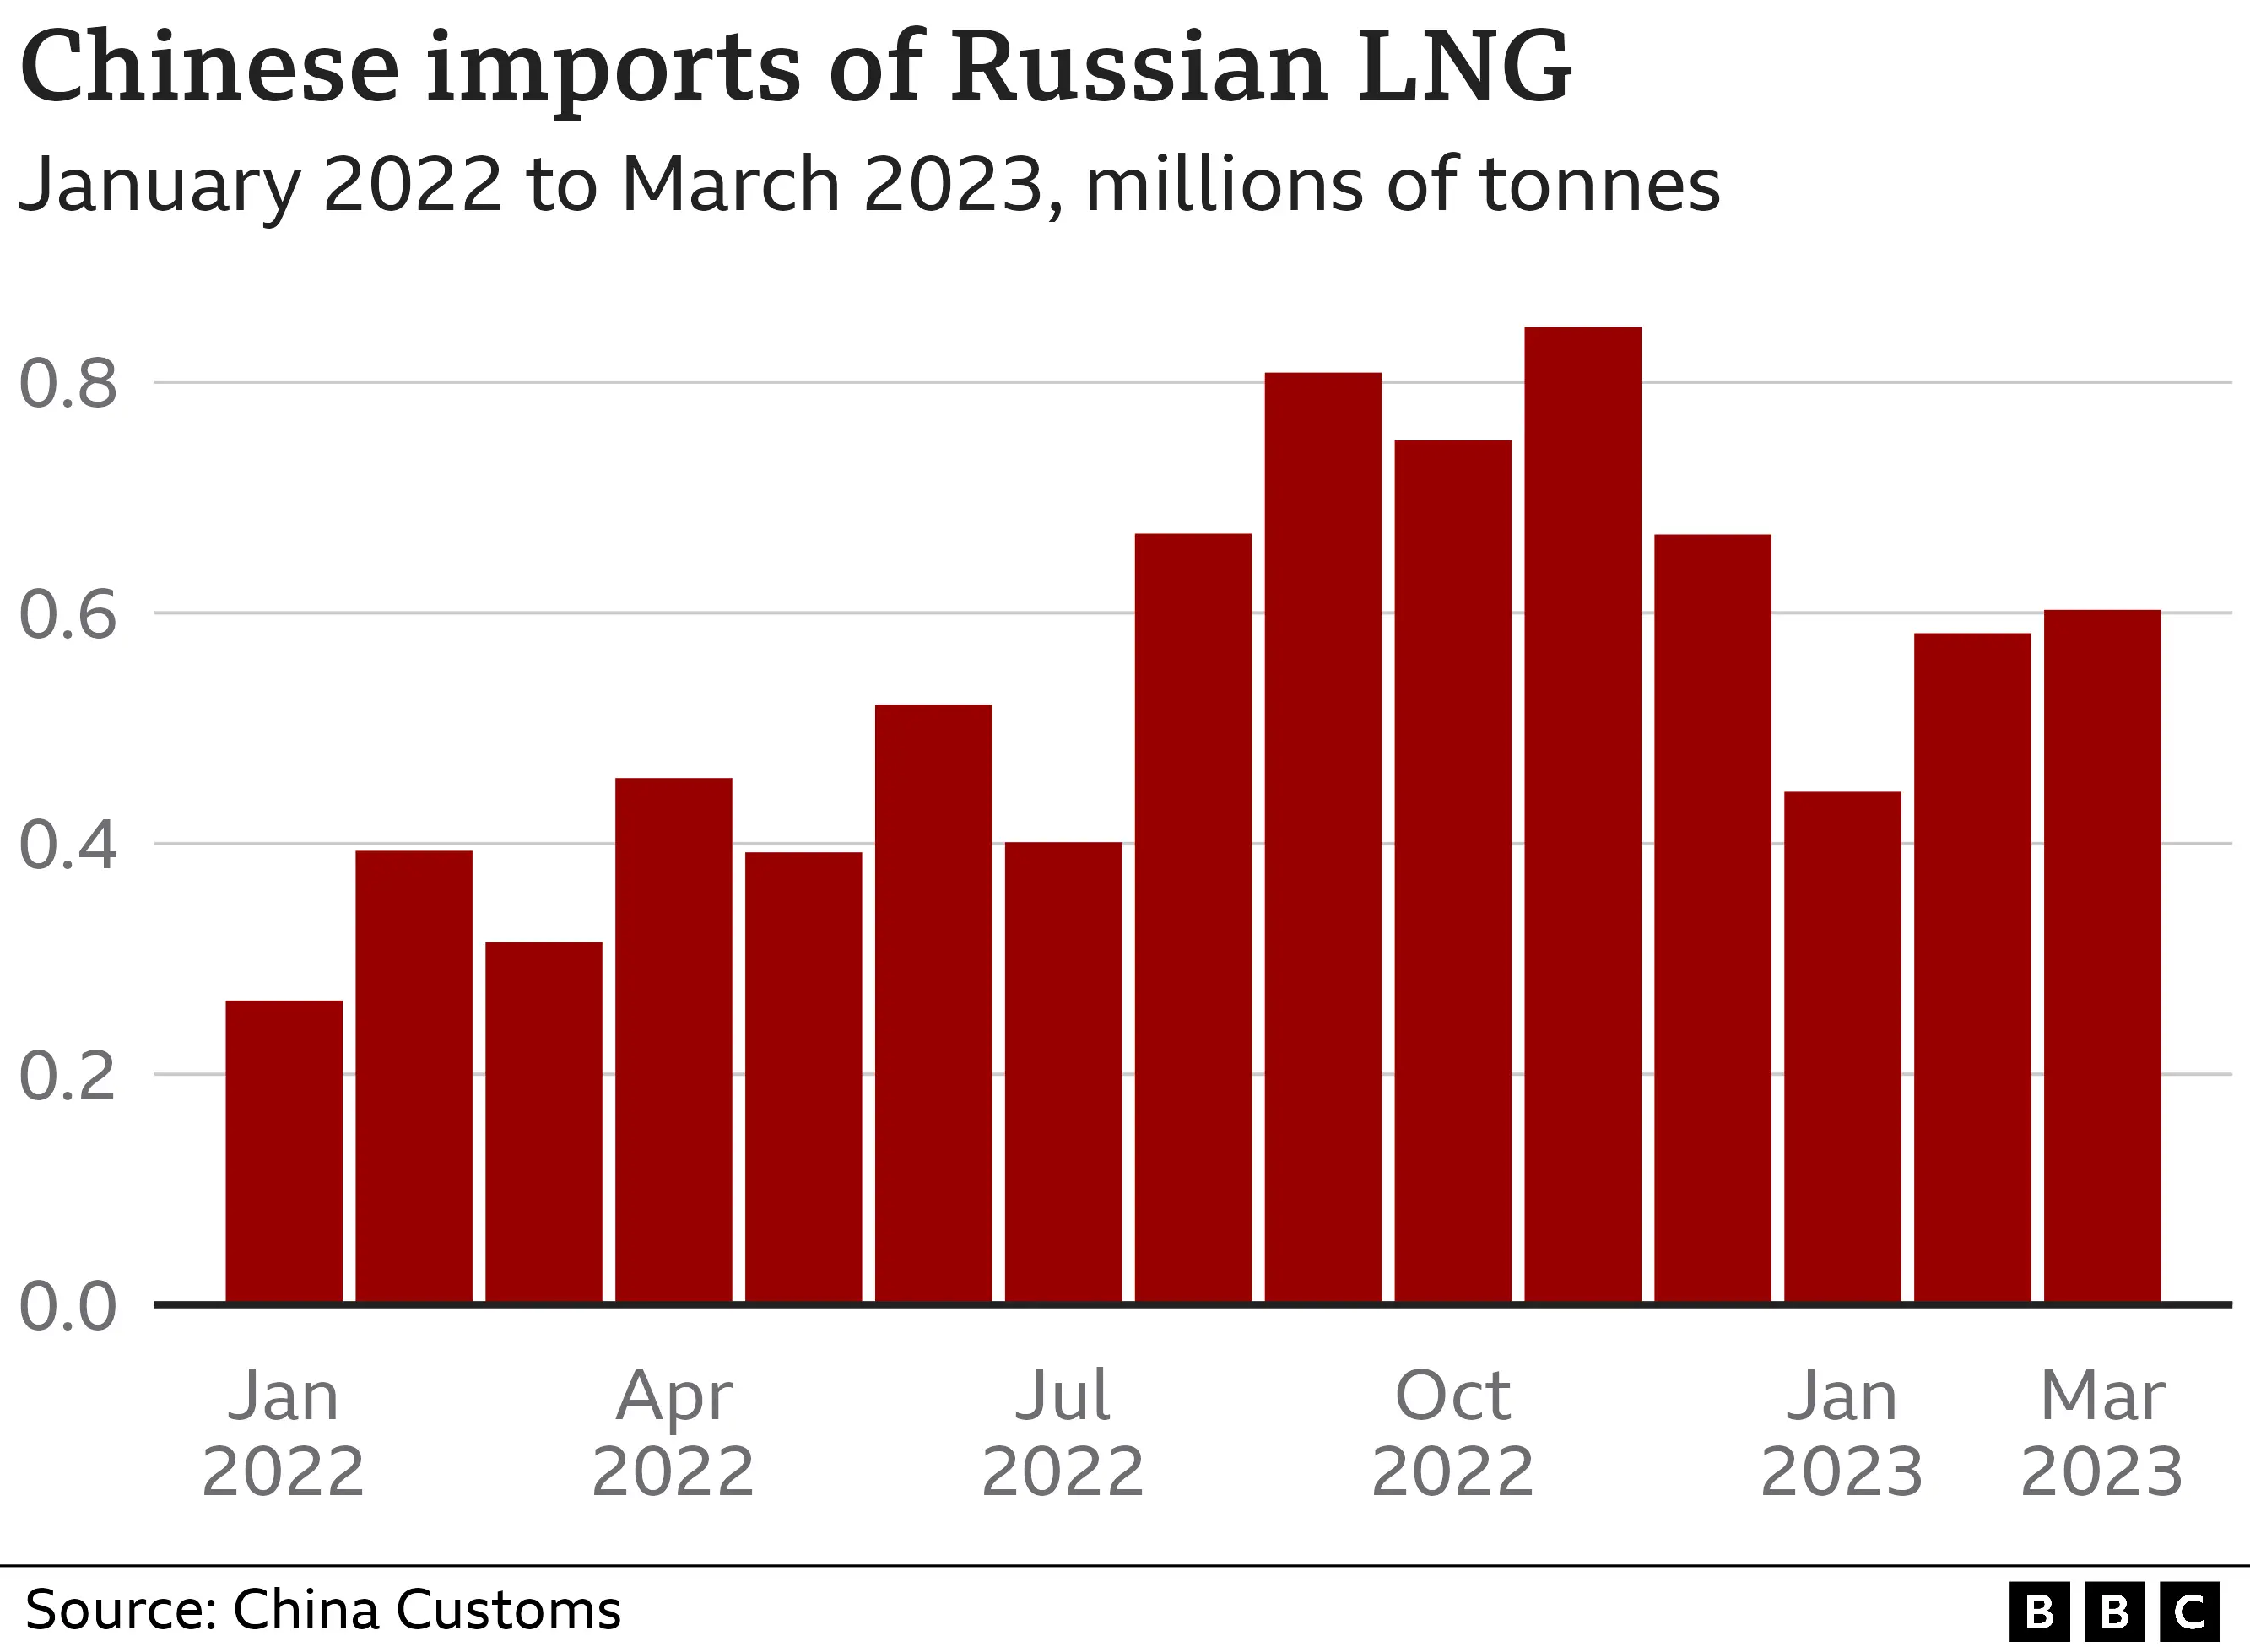 Bar chart showing China's LNG imports from Russia